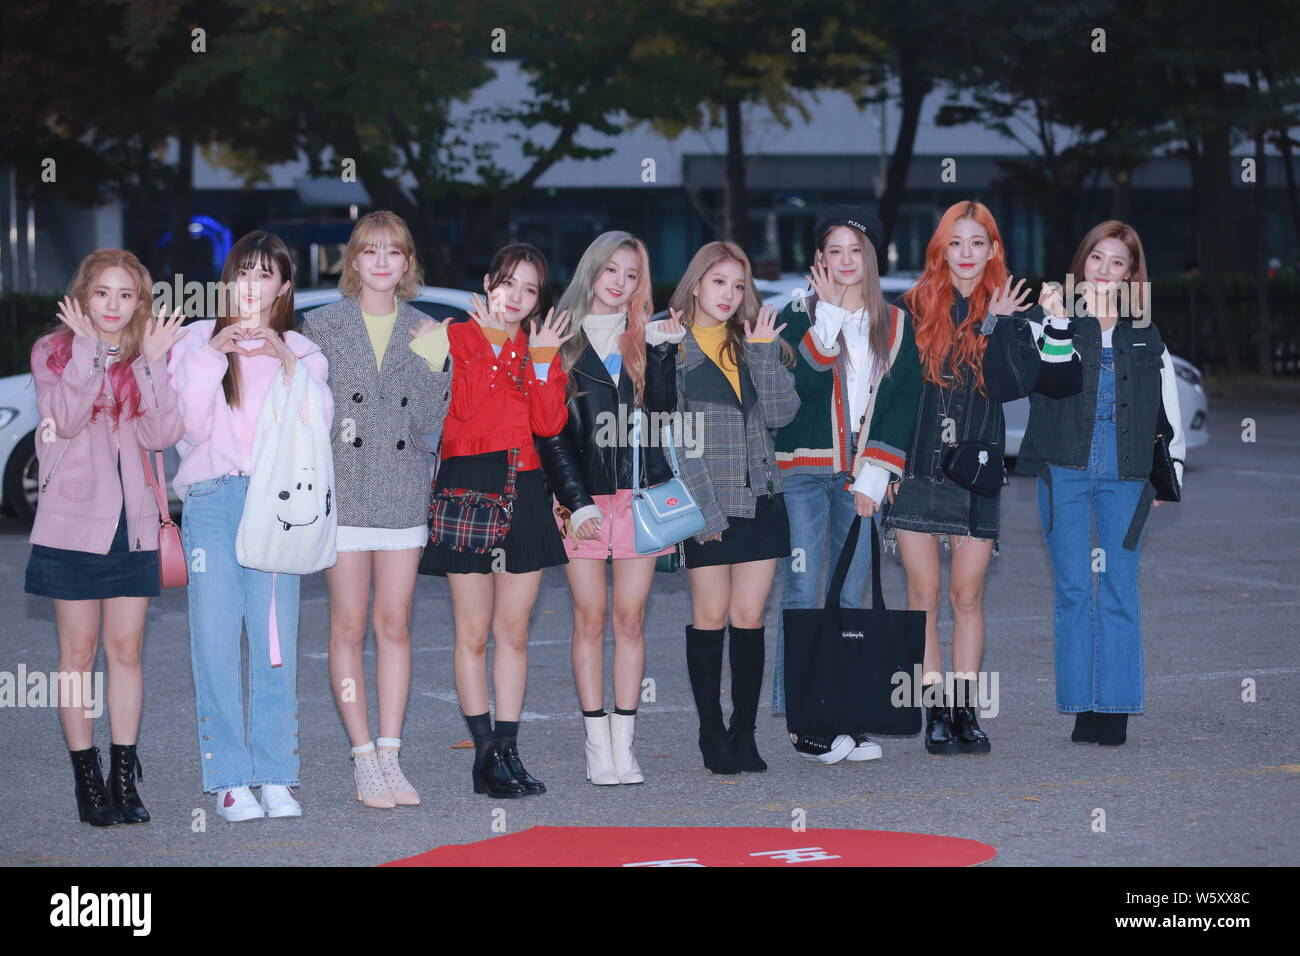 Members of South Korean girl group Fromis 9 attend the filming session for  an episode of the music program Music Bank program in Seoul, South Korea  Stock Photo - Alamy